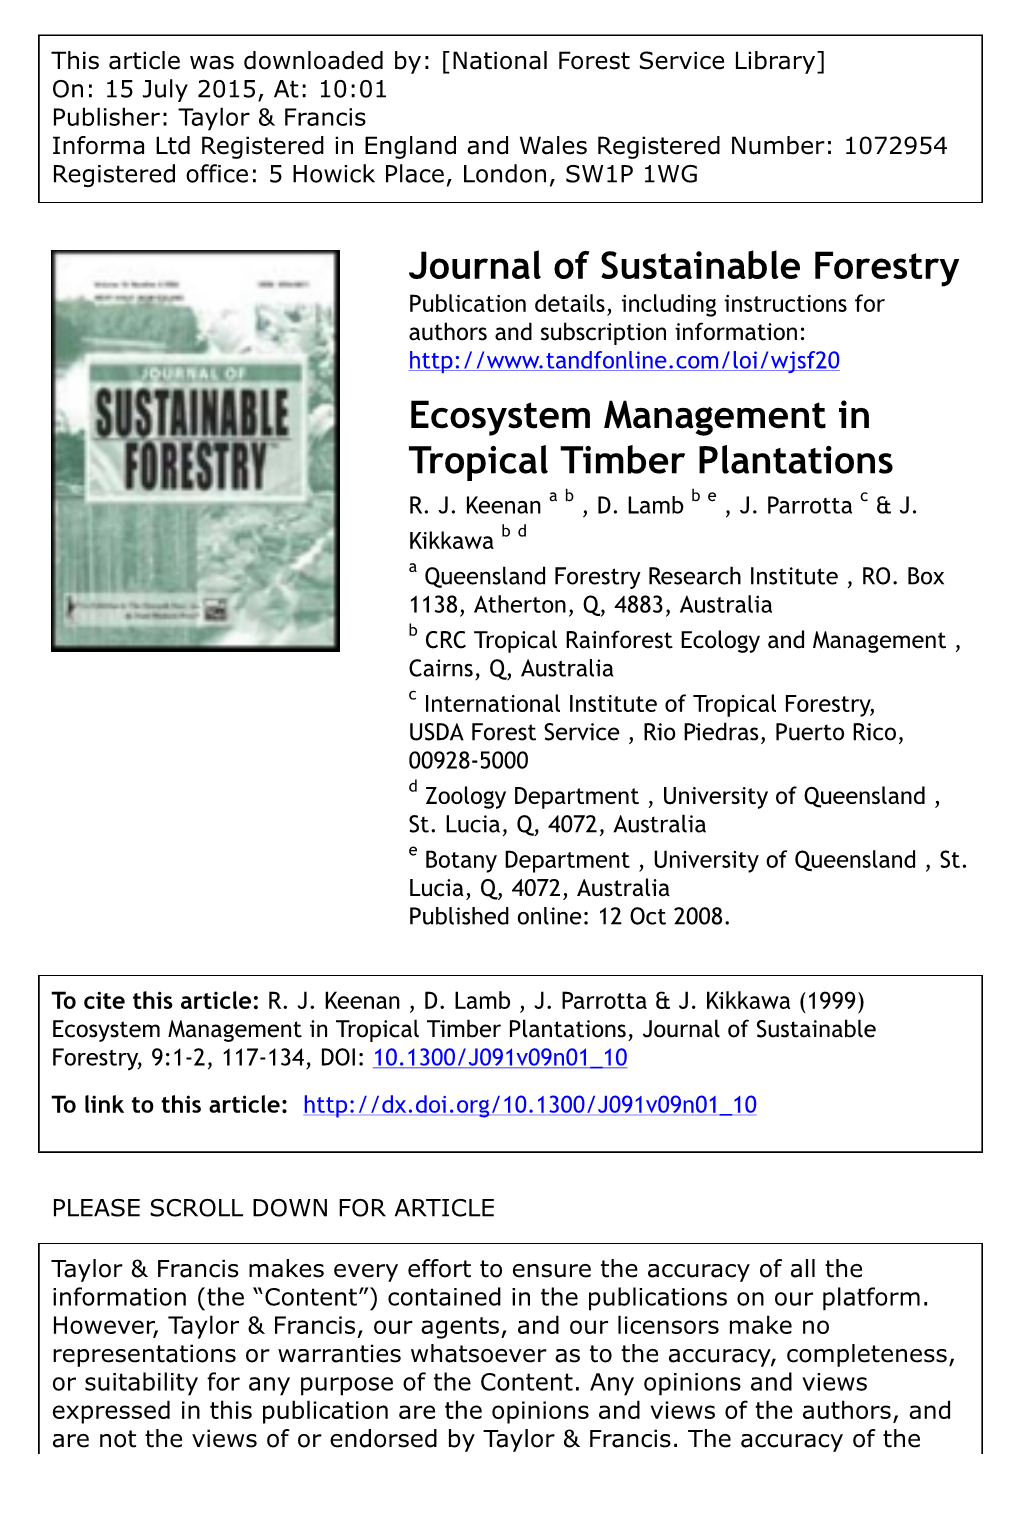 Journal of Sustainable Forestry Ecosystem Management in Tropical